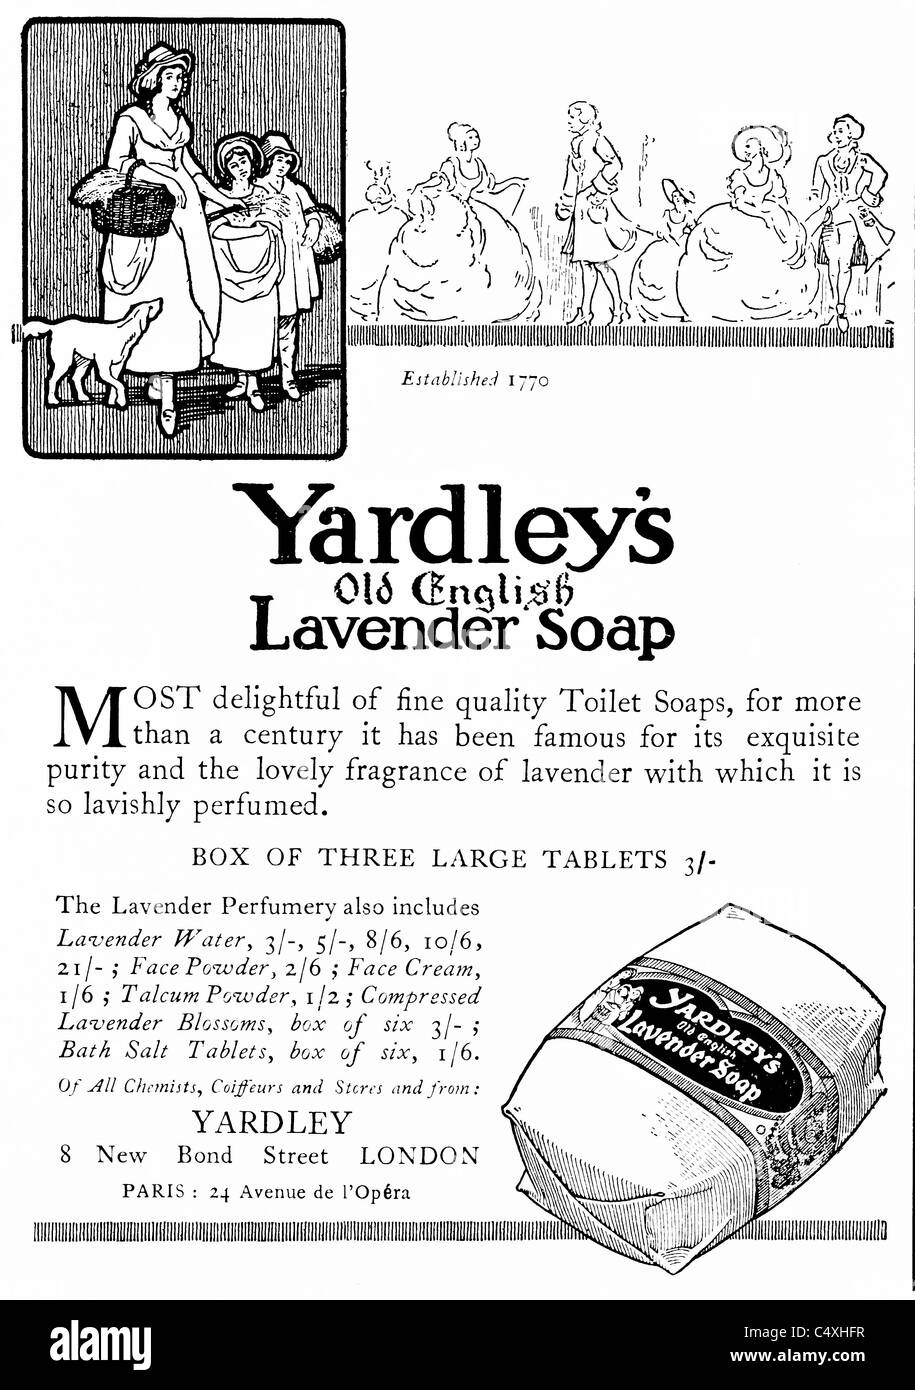 1926 "Yardley's Lavender Soap" Advertisement from "Homes and Gardens" magazine. Stock Photo